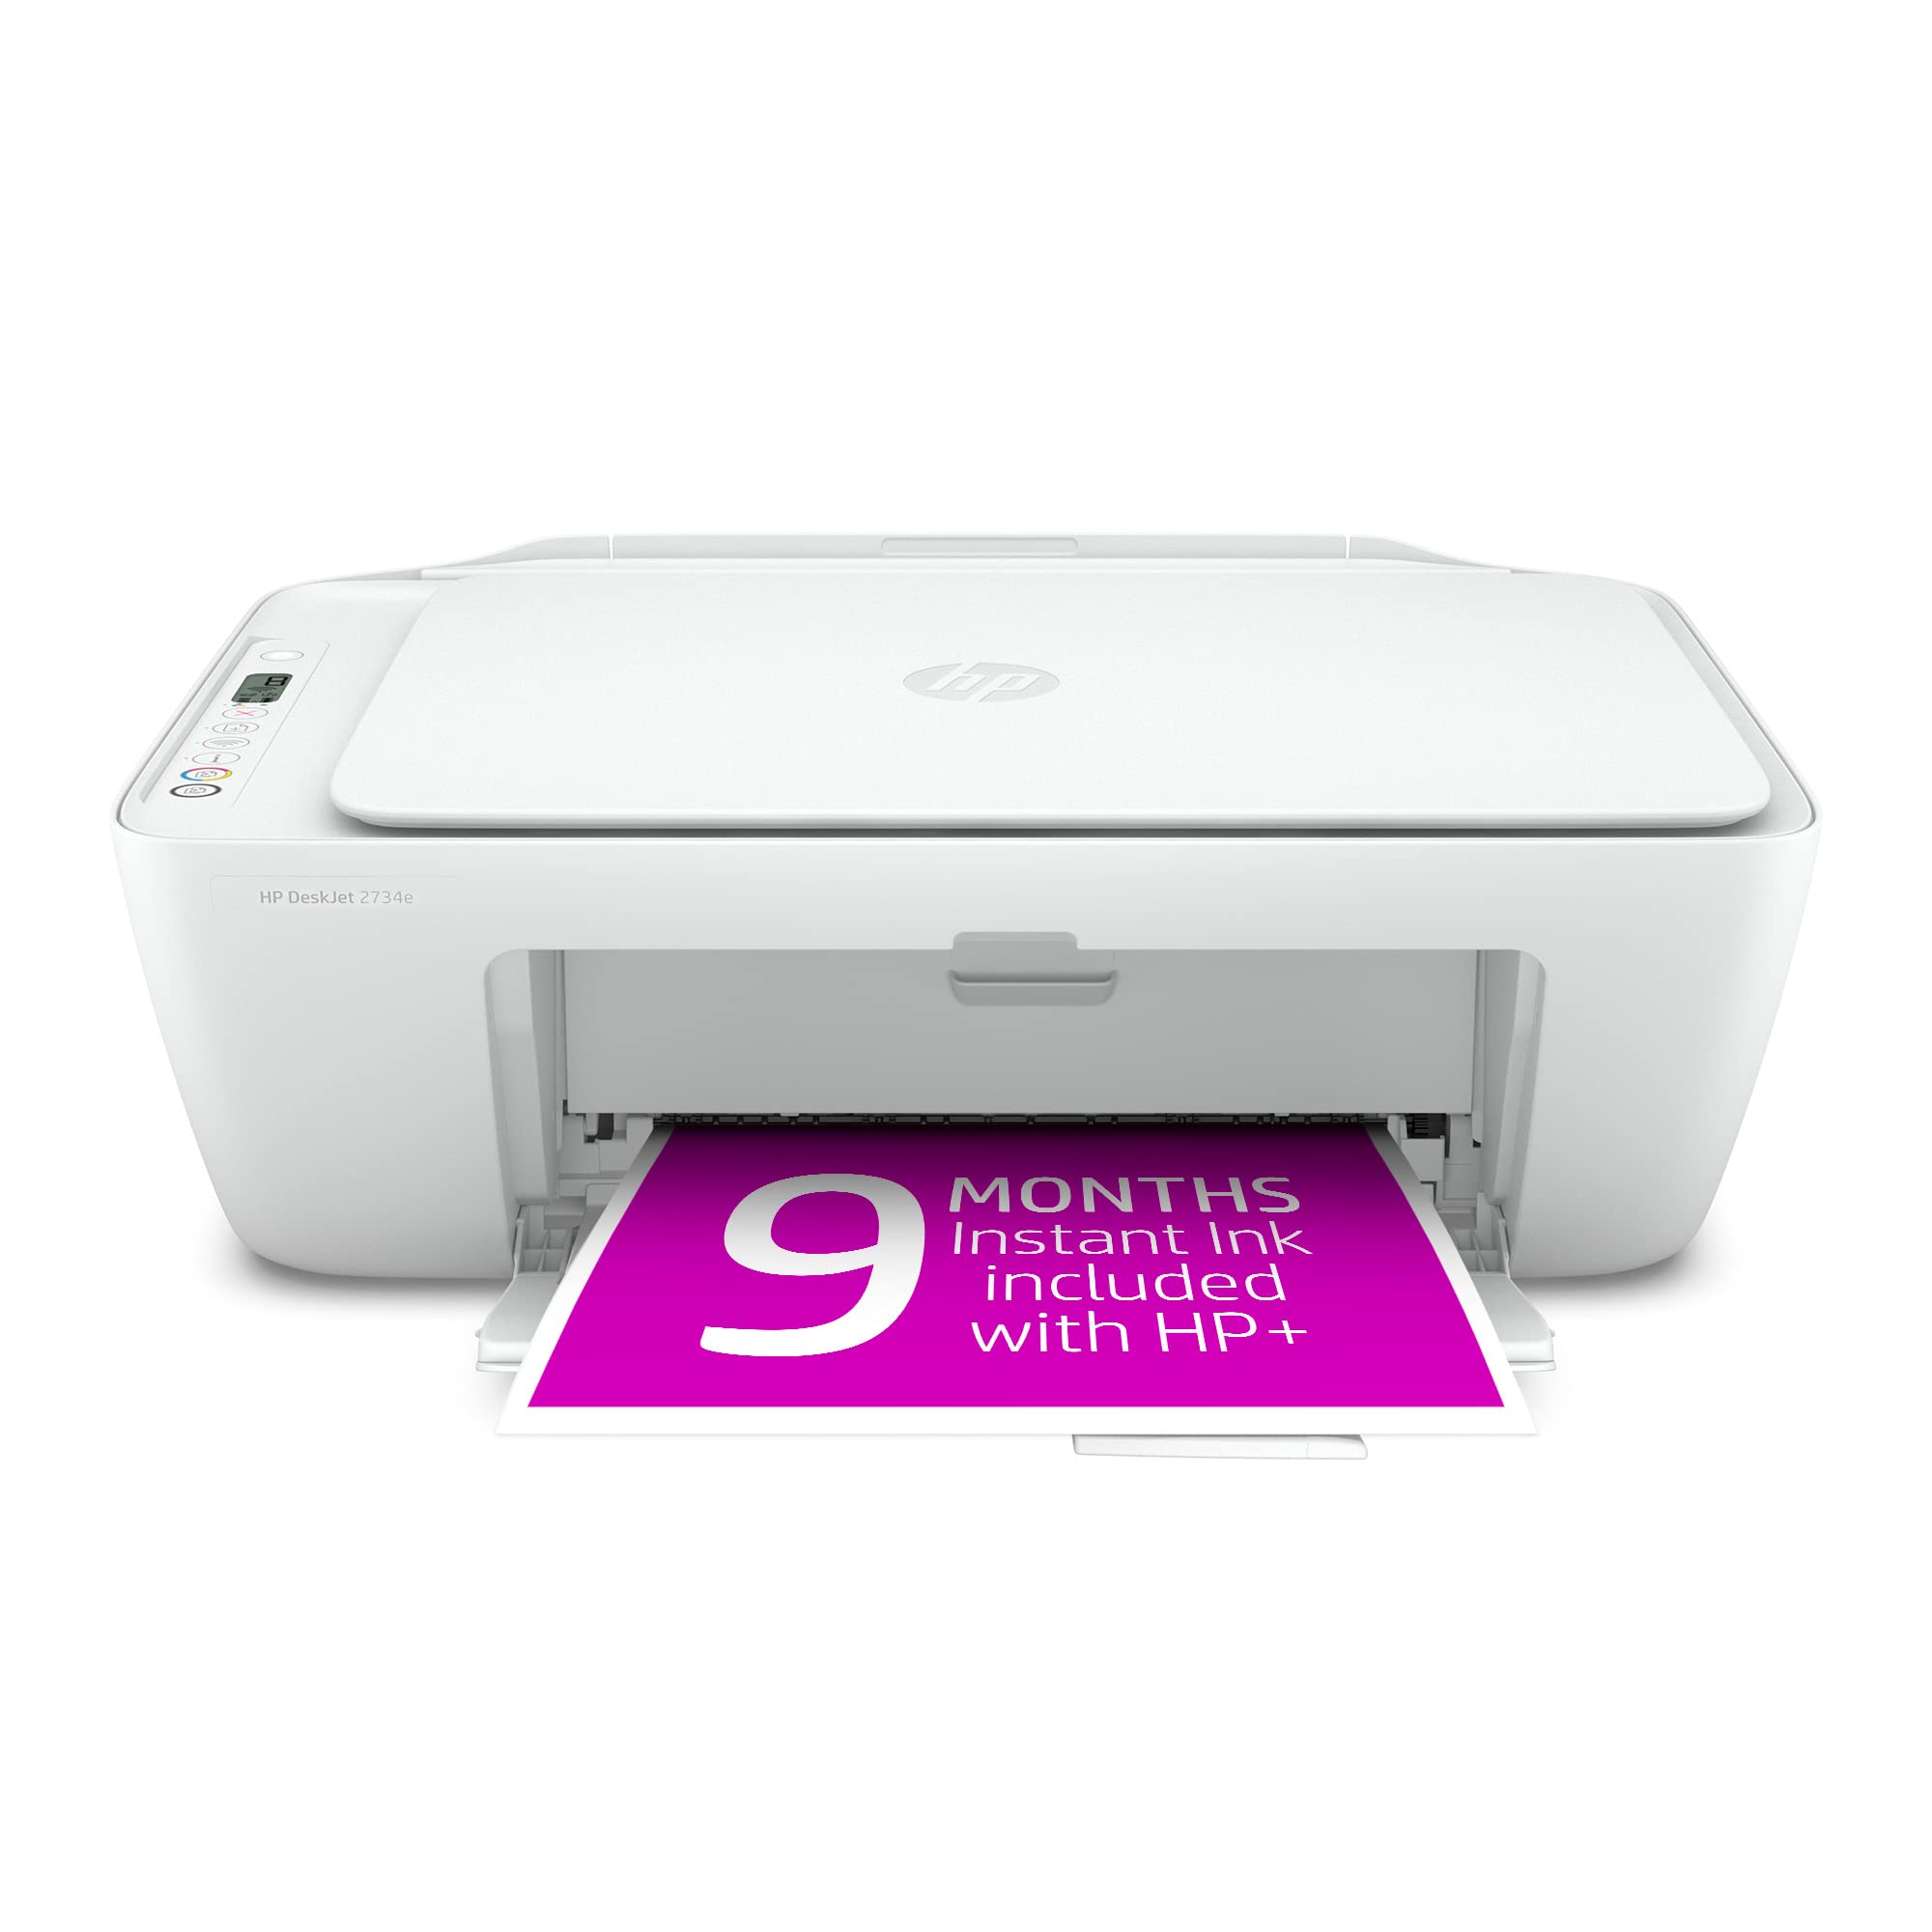 HP DeskJet 2734e Wireless Color All-in-One Printer with 9 Months Free Ink (26K72A) $39.99